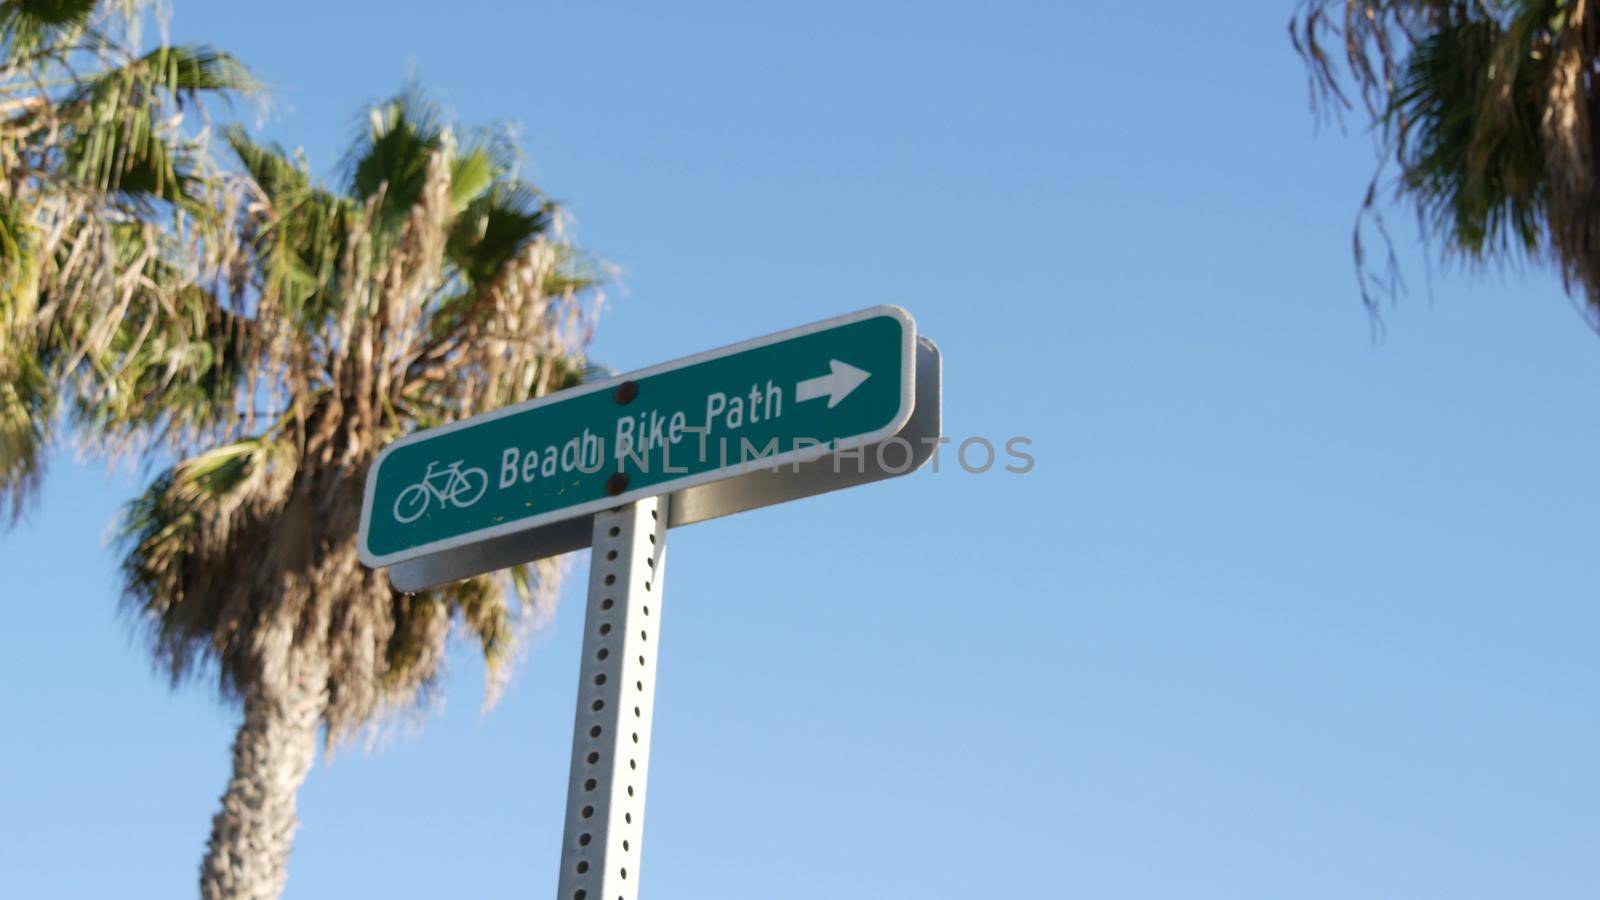 Bike Route green road sign in California, USA. Bicycle lane singpost. Bikeway in Oceanside pacific tourist resort. Cycleway signboard and palm. Healthy lifestyle, recreation and safety cycling symbol.